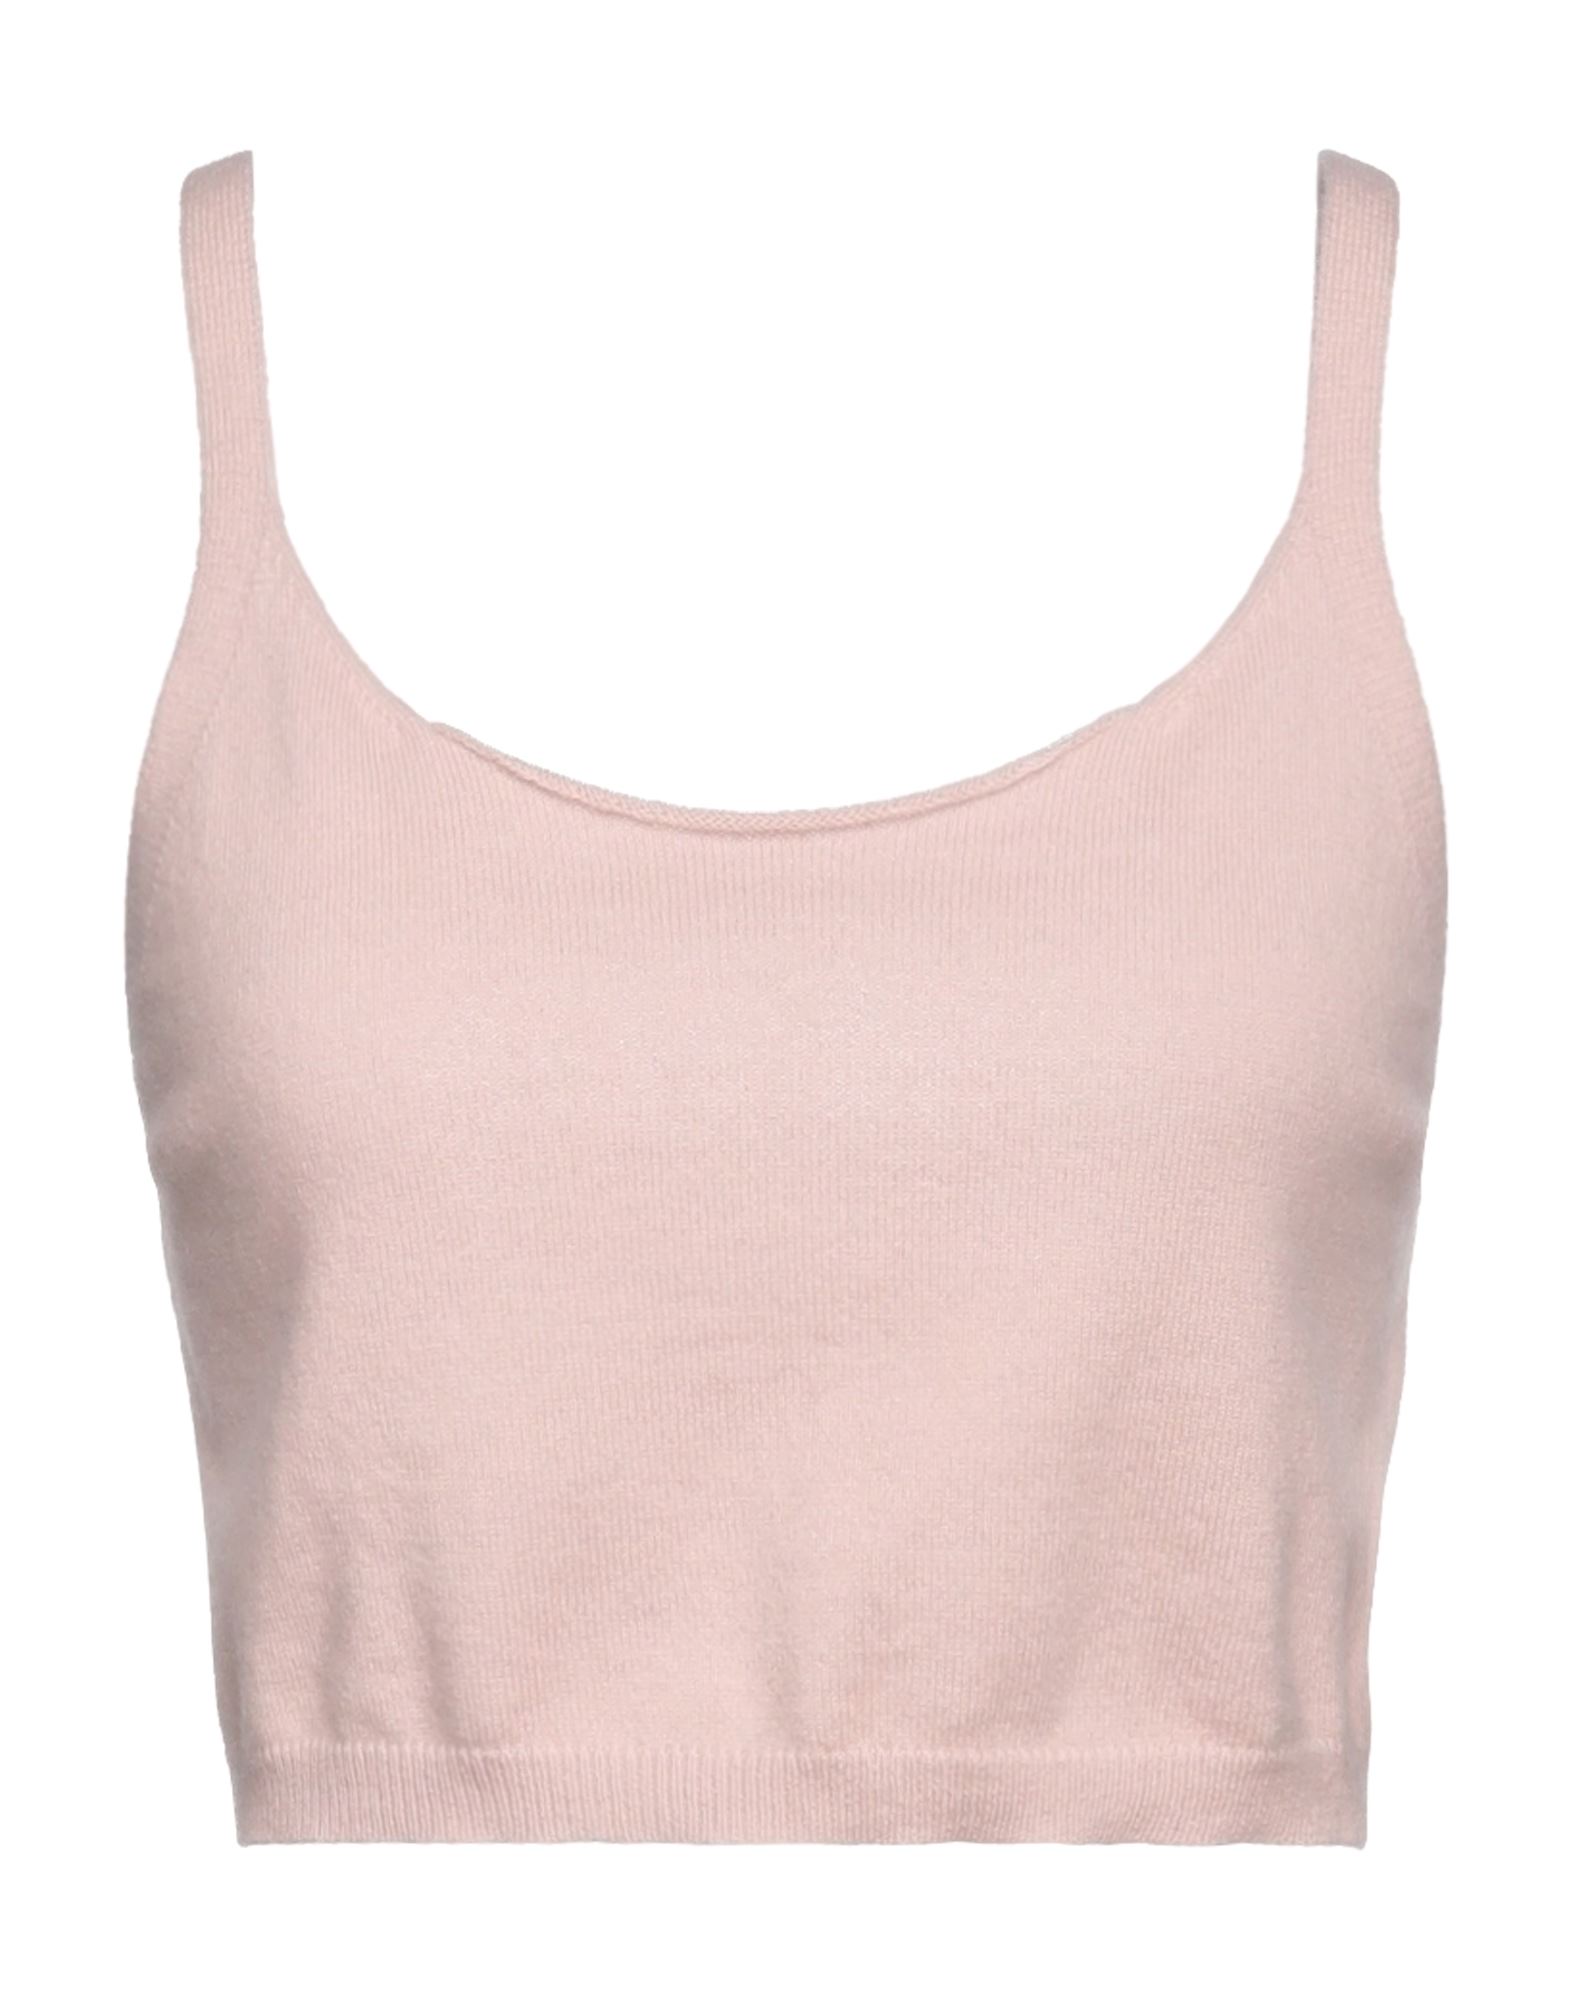 Statement Tops In Pink